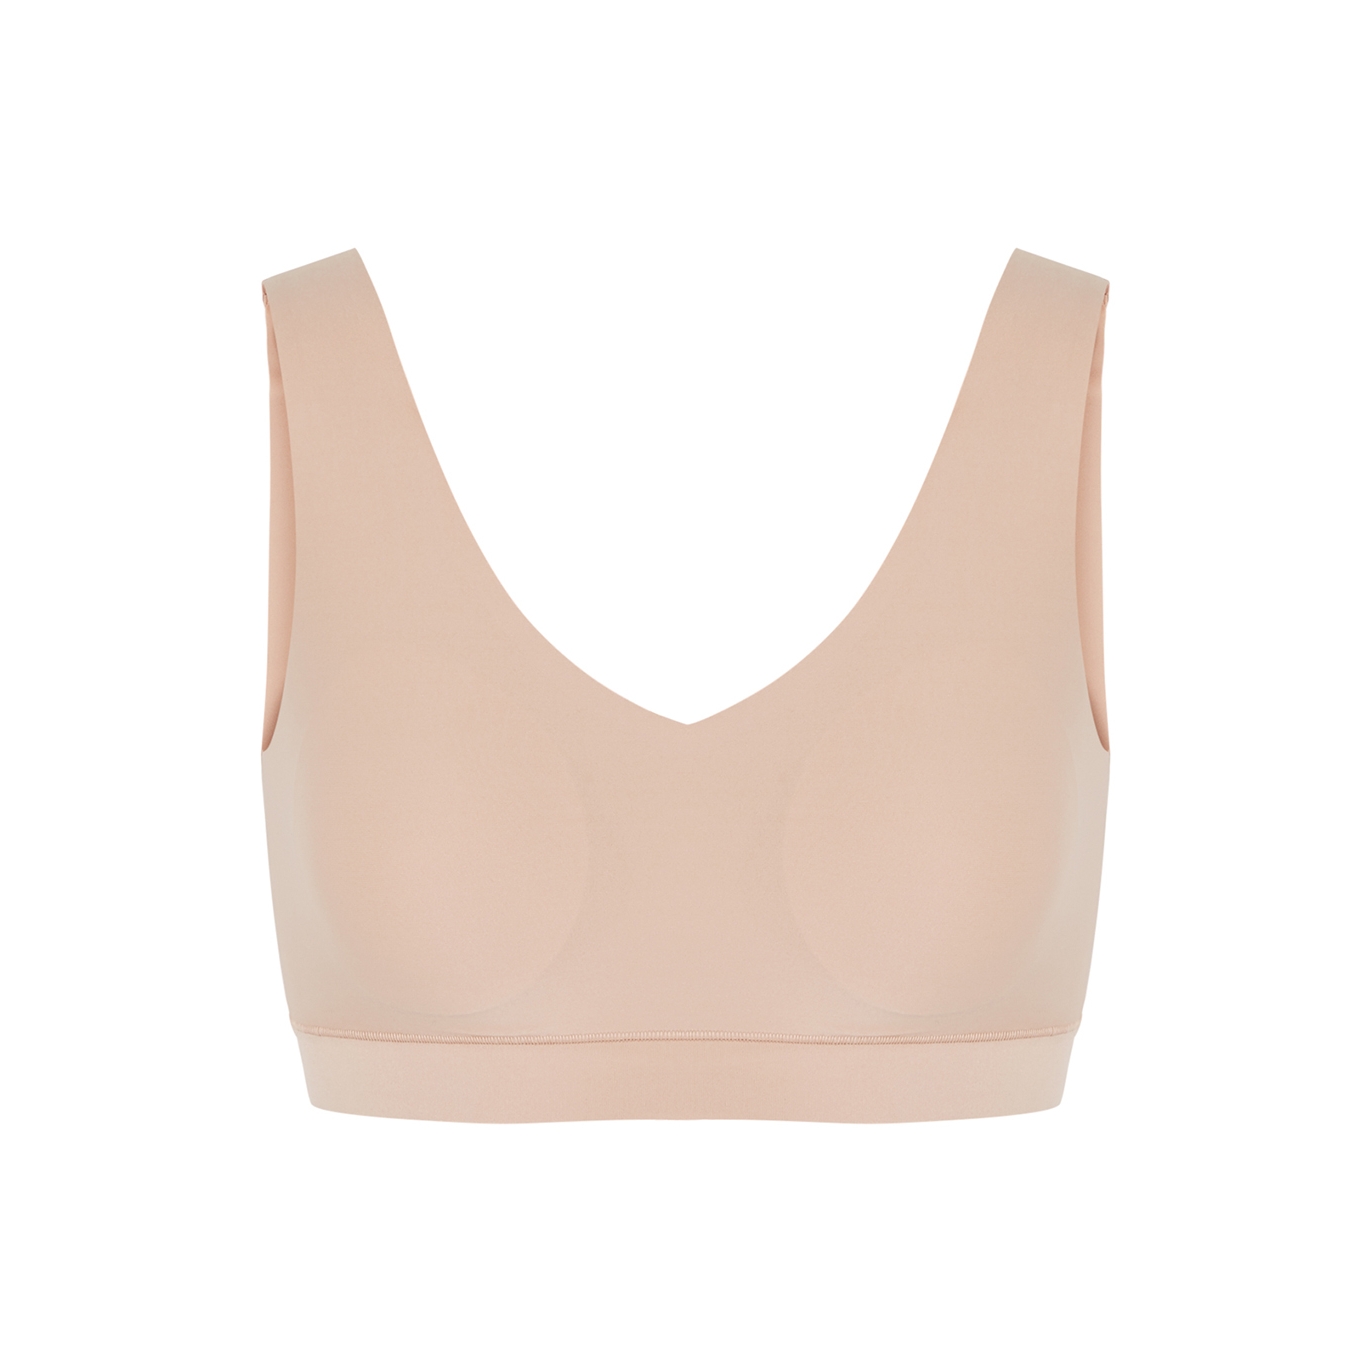 Chantelle Soft Stretch Nude Padded Soft-cup Bra